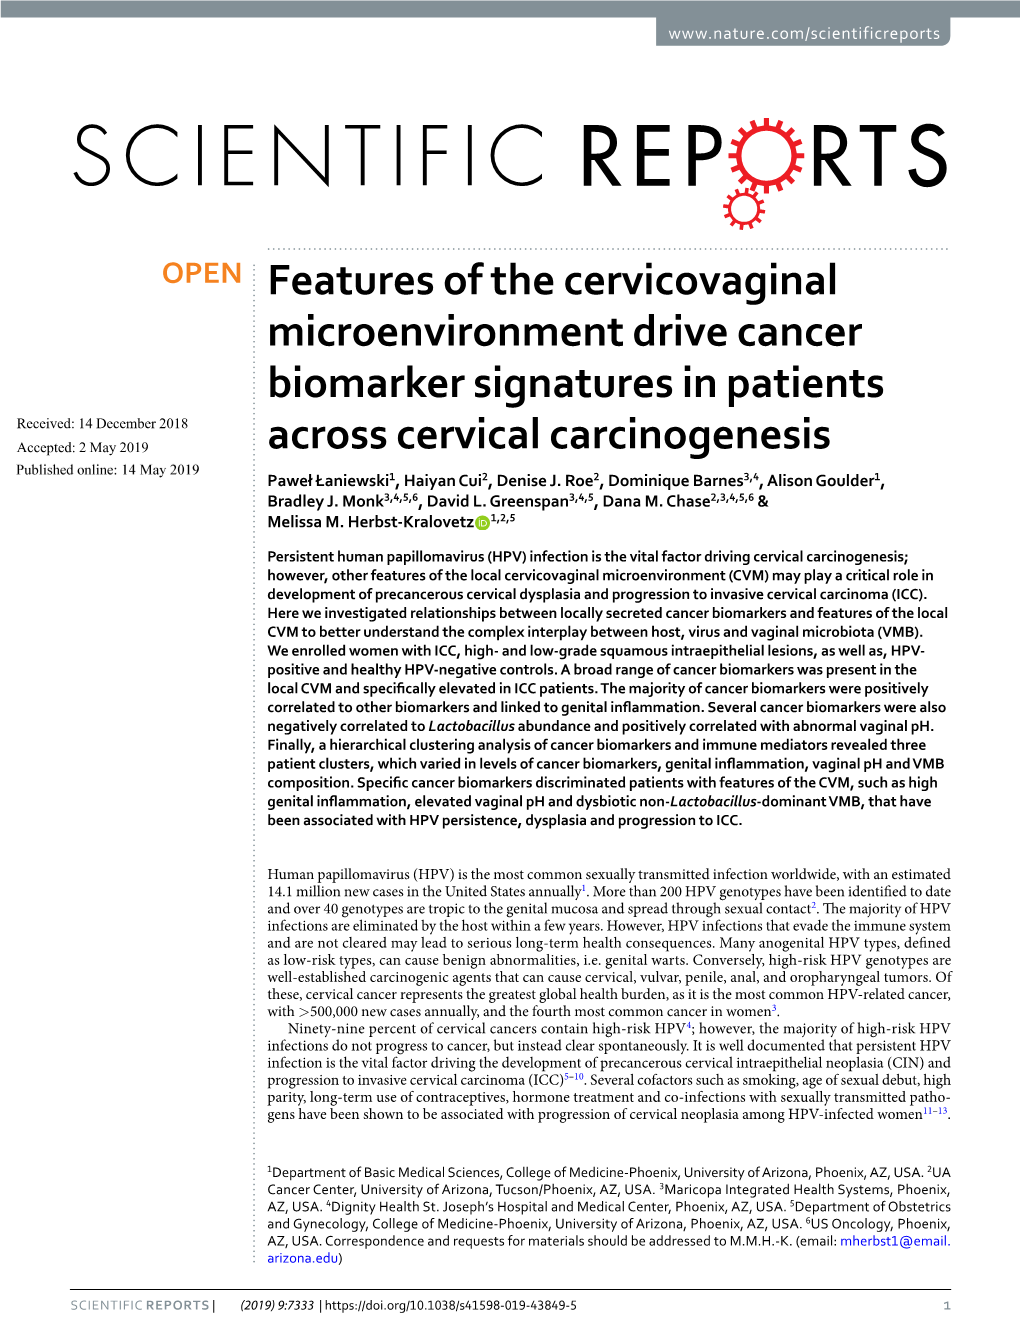 Features of the Cervicovaginal Microenvironment Drive Cancer